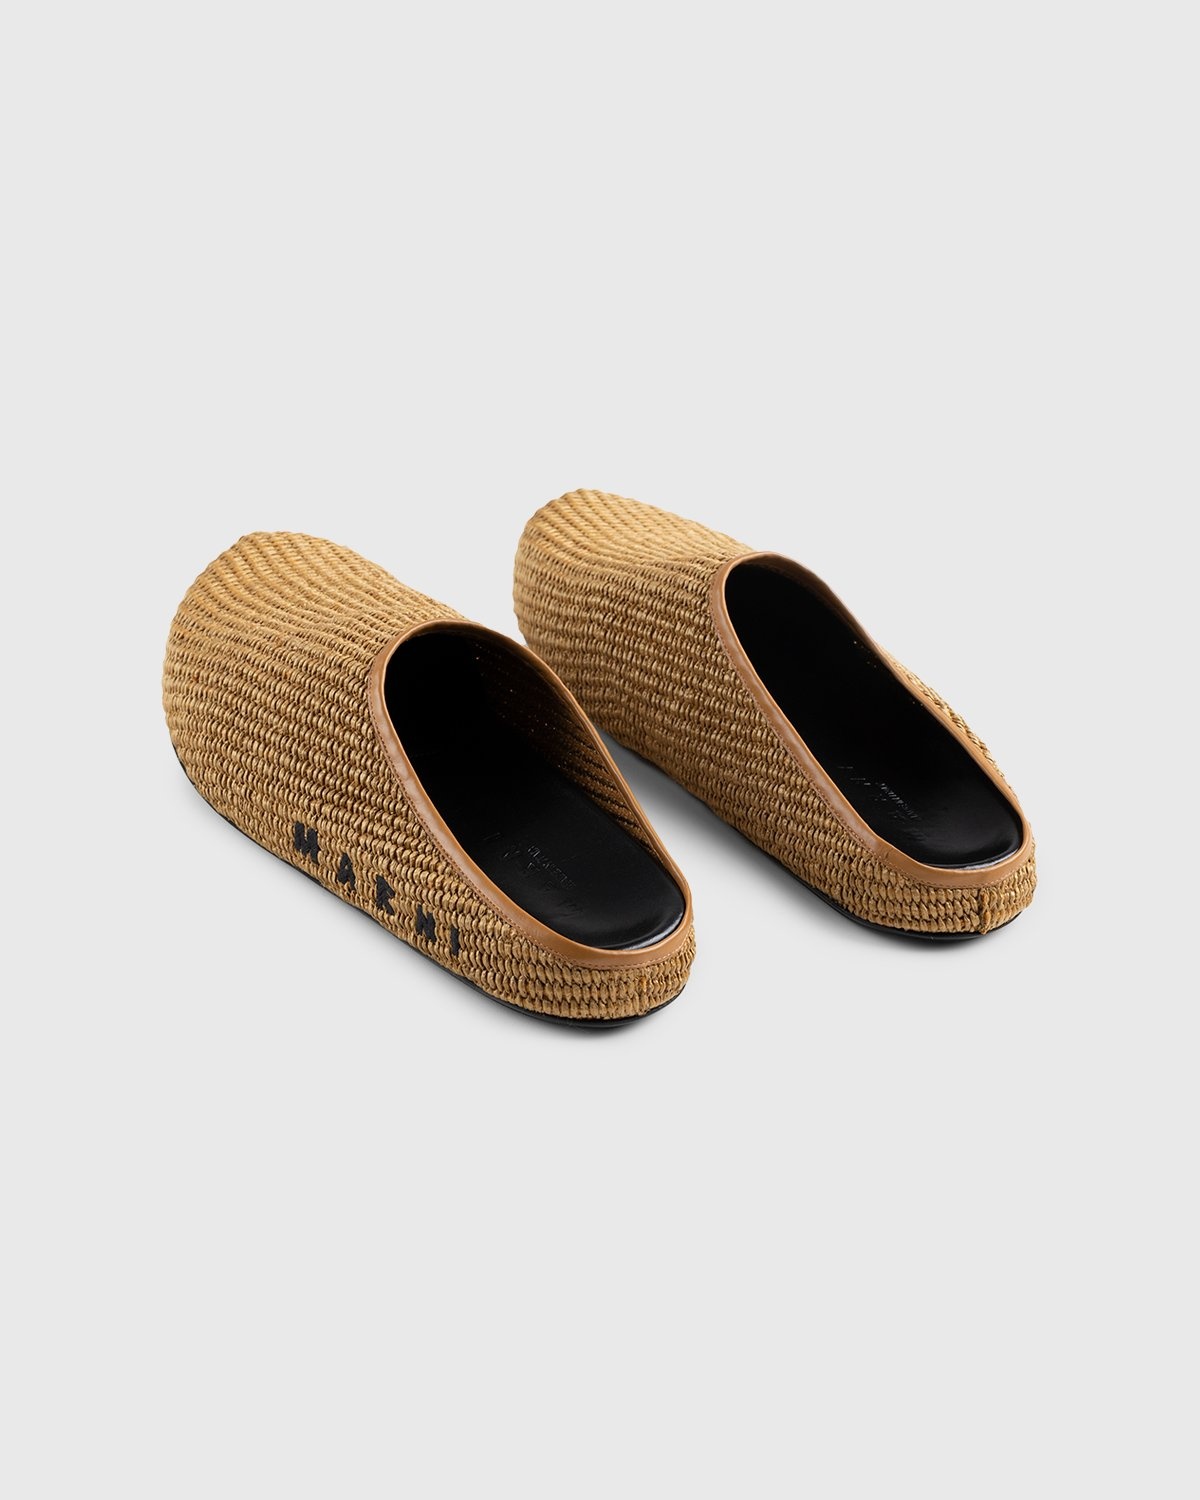 Marni – Woven Raffia and Leather Mules Brown/Black - Mules - Brown - Image 4